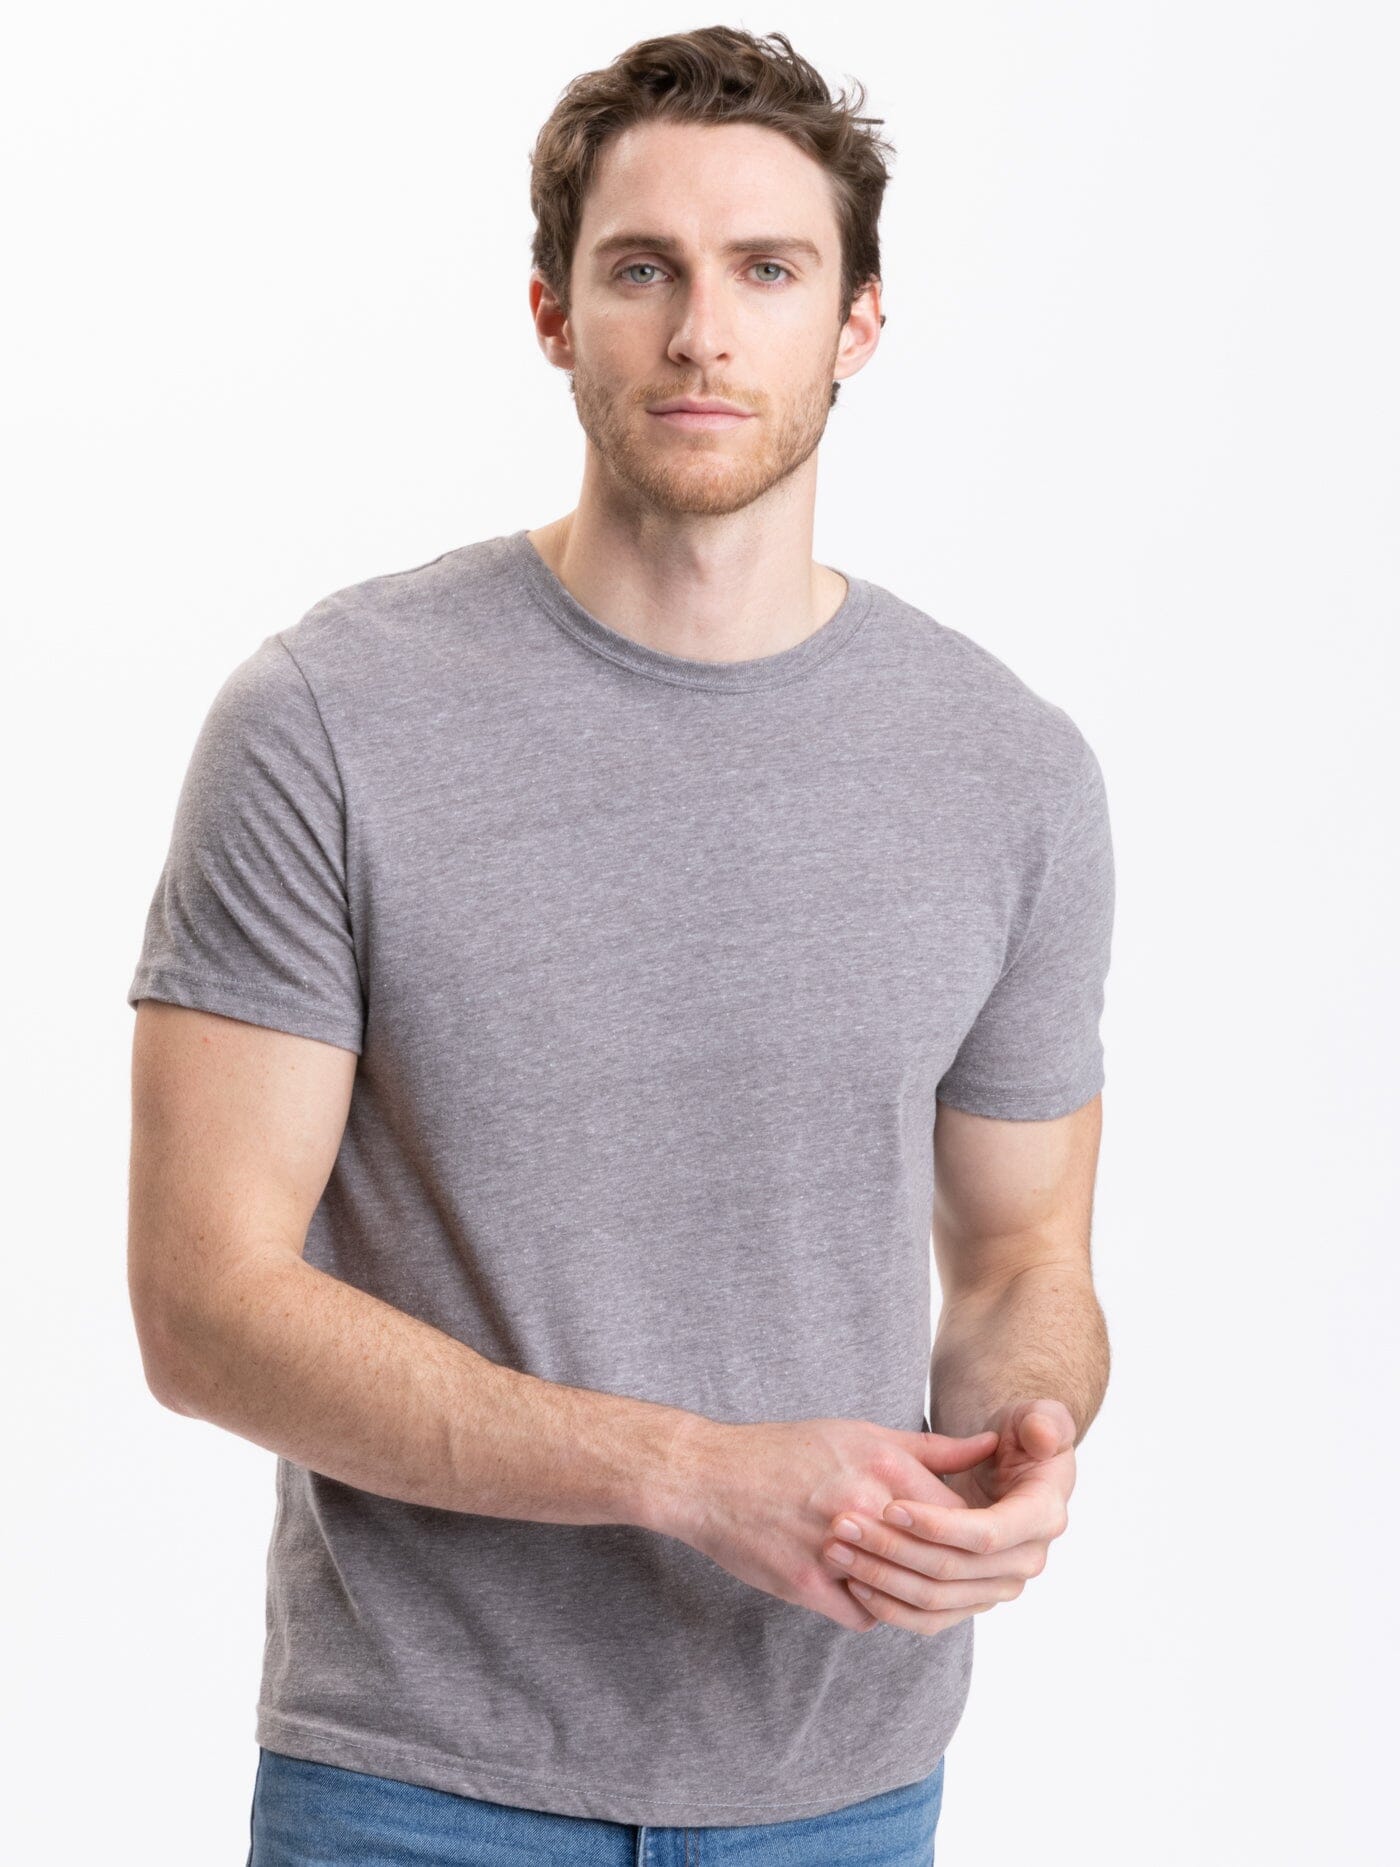 Tee Heather Neck Threads Crew – Triblend Grey Thought in 4